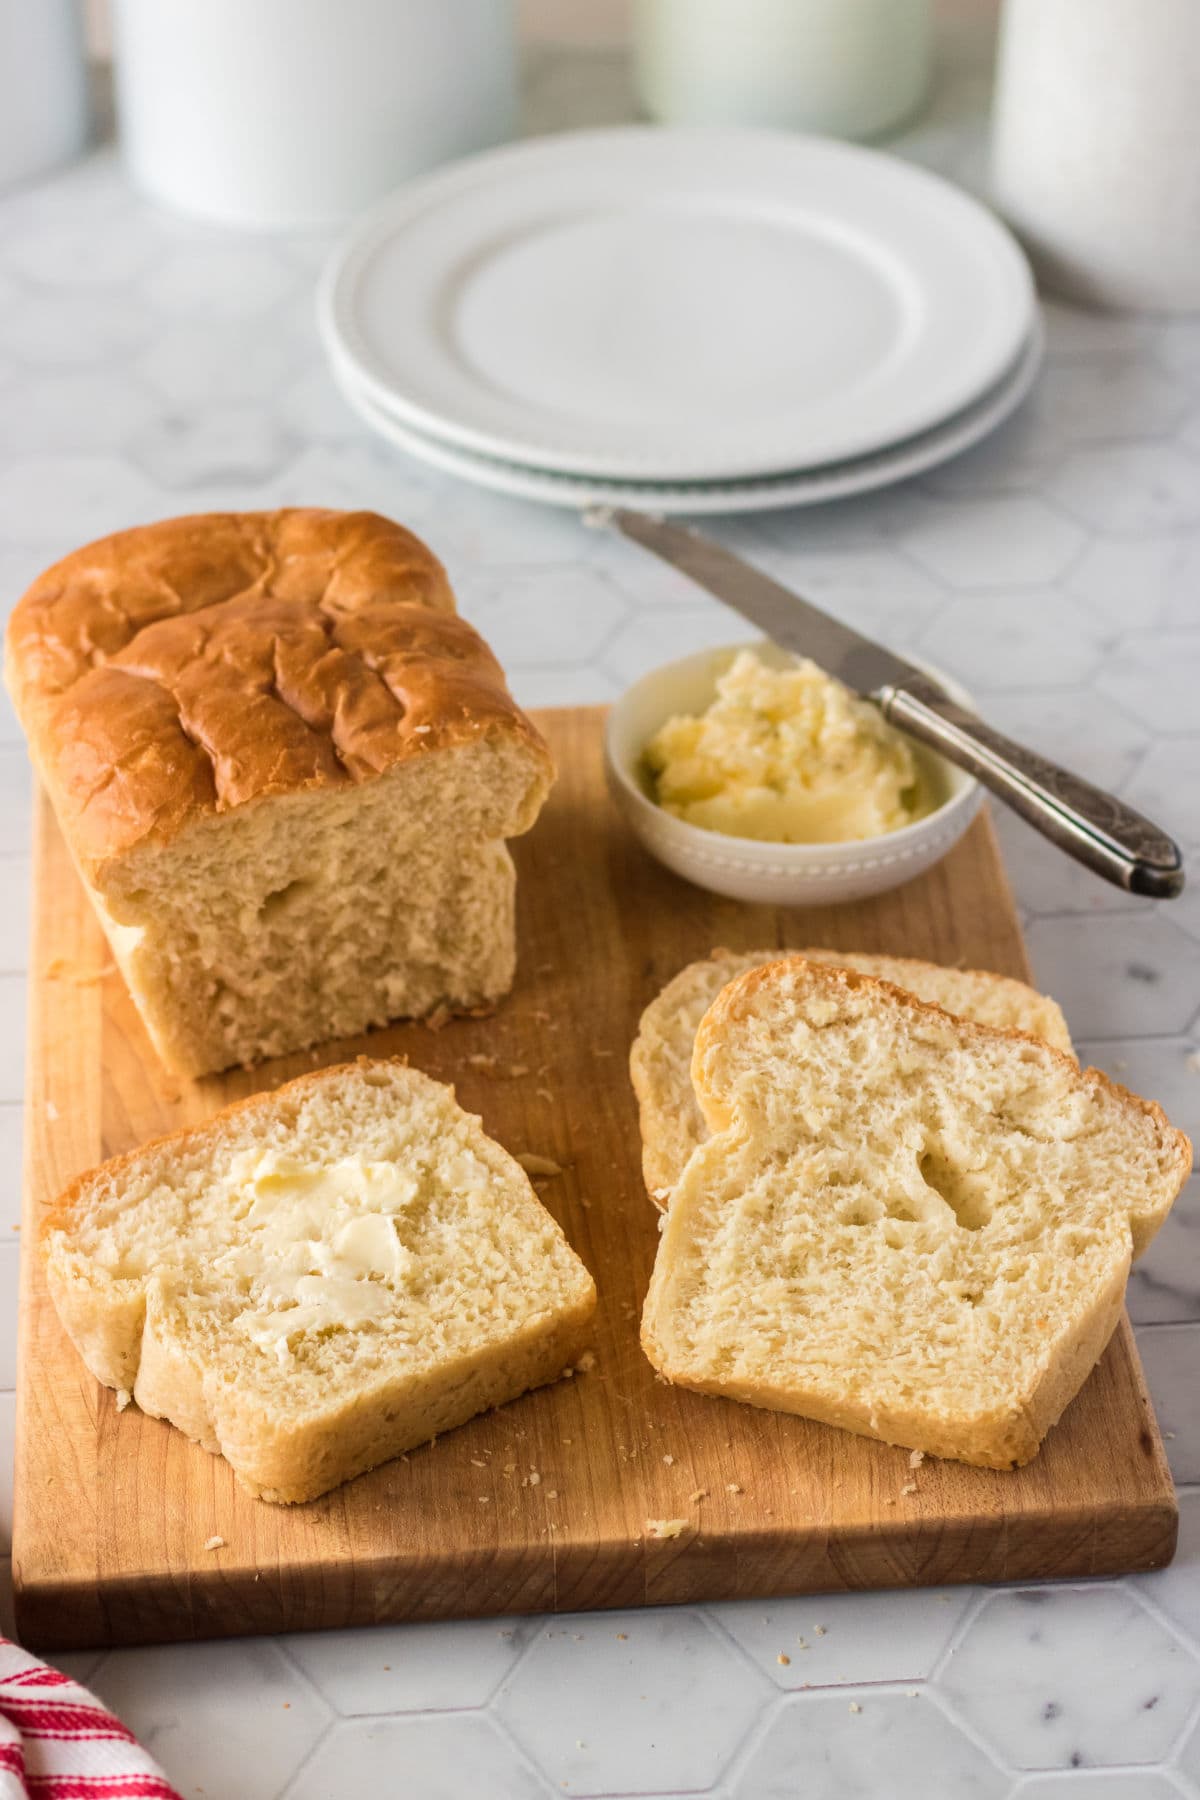 Batter bread next to slices with butter.